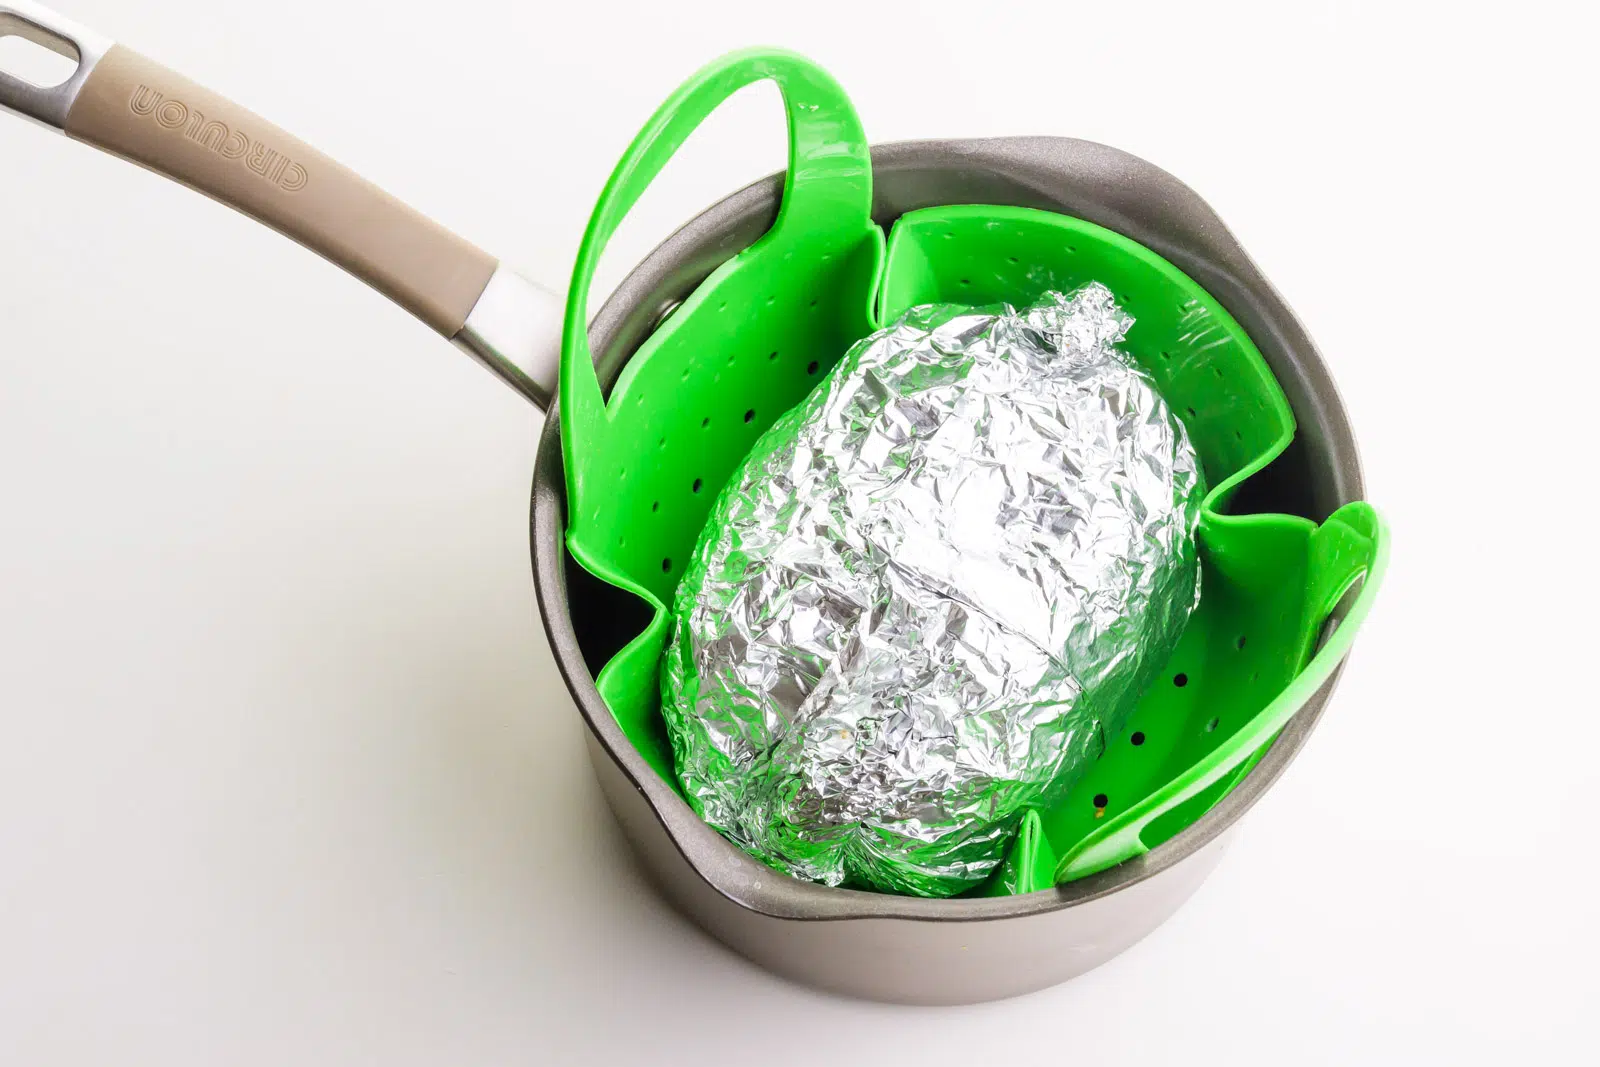 Seitan turkey has been wrapped in foil and is sitting in a steamer basket inside of a saucepan.